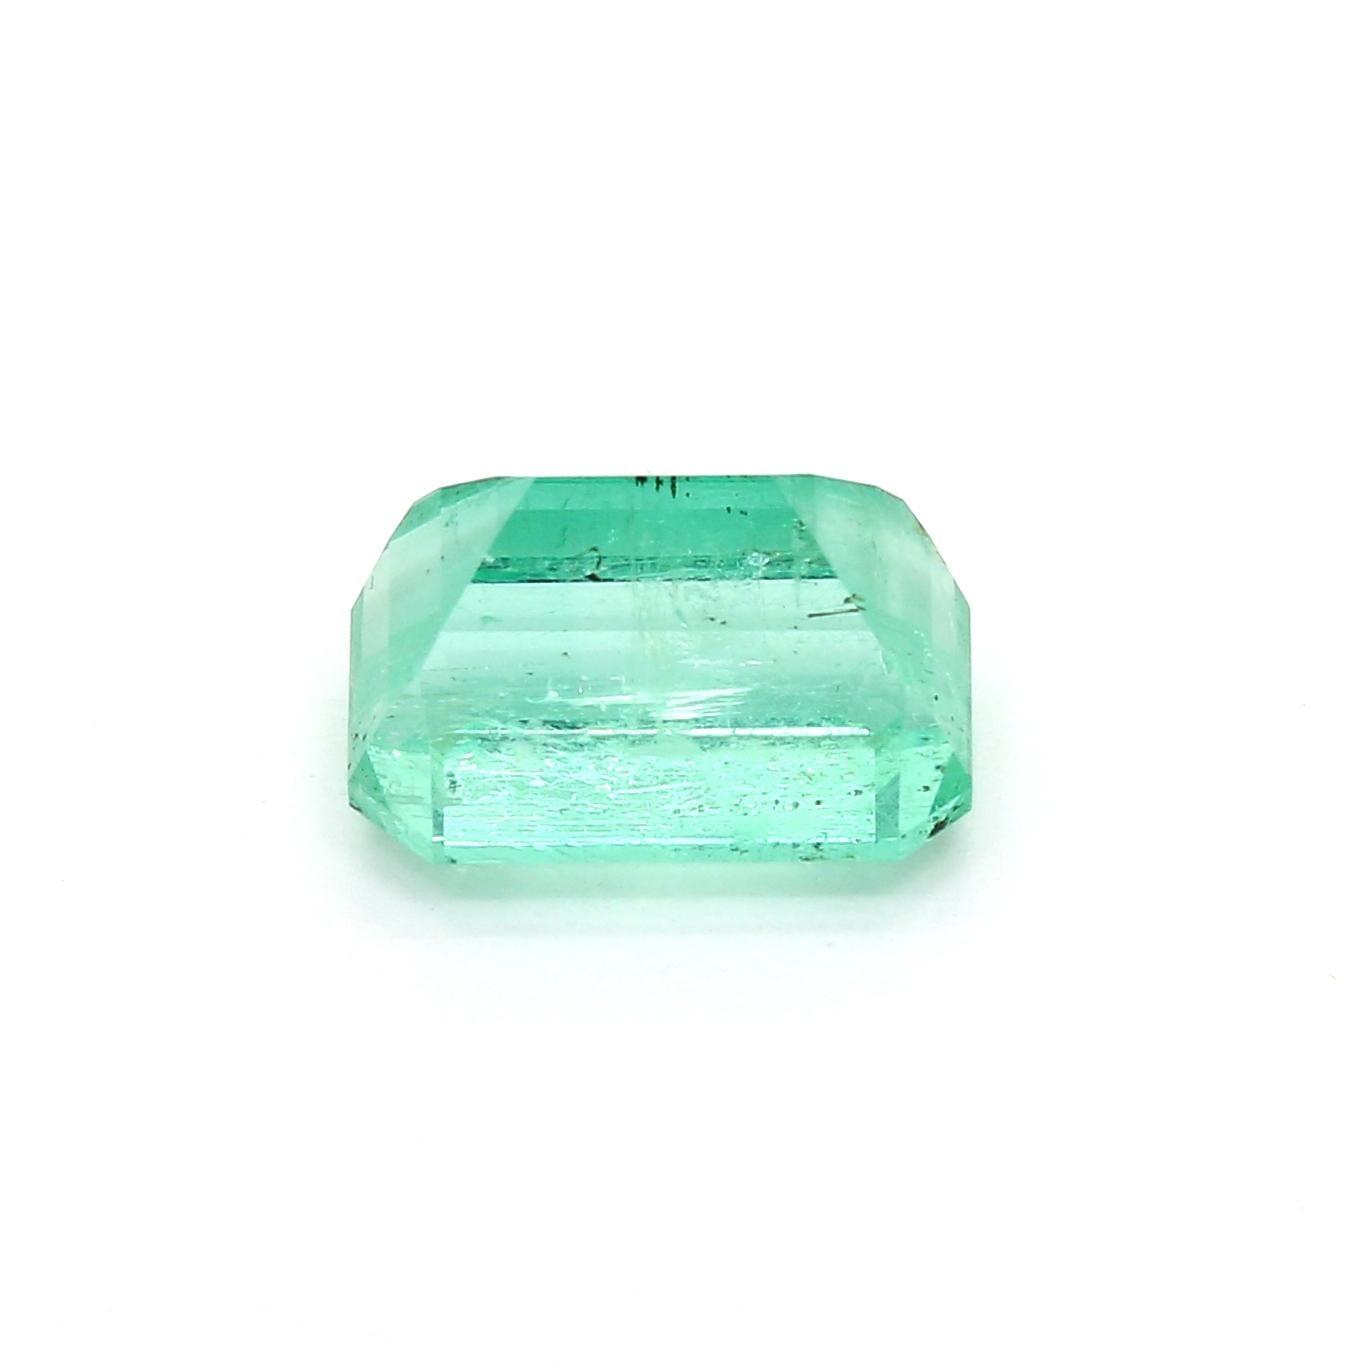 An amazing Russian Emerald which allows jewelers to create a unique piece of wearable art.
This exceptional quality gemstone would make a custom-made jewelry design. Perfect for a Ring or Pendant.

Shape - Octagon
Weight - 4.06 ct
Treatment -